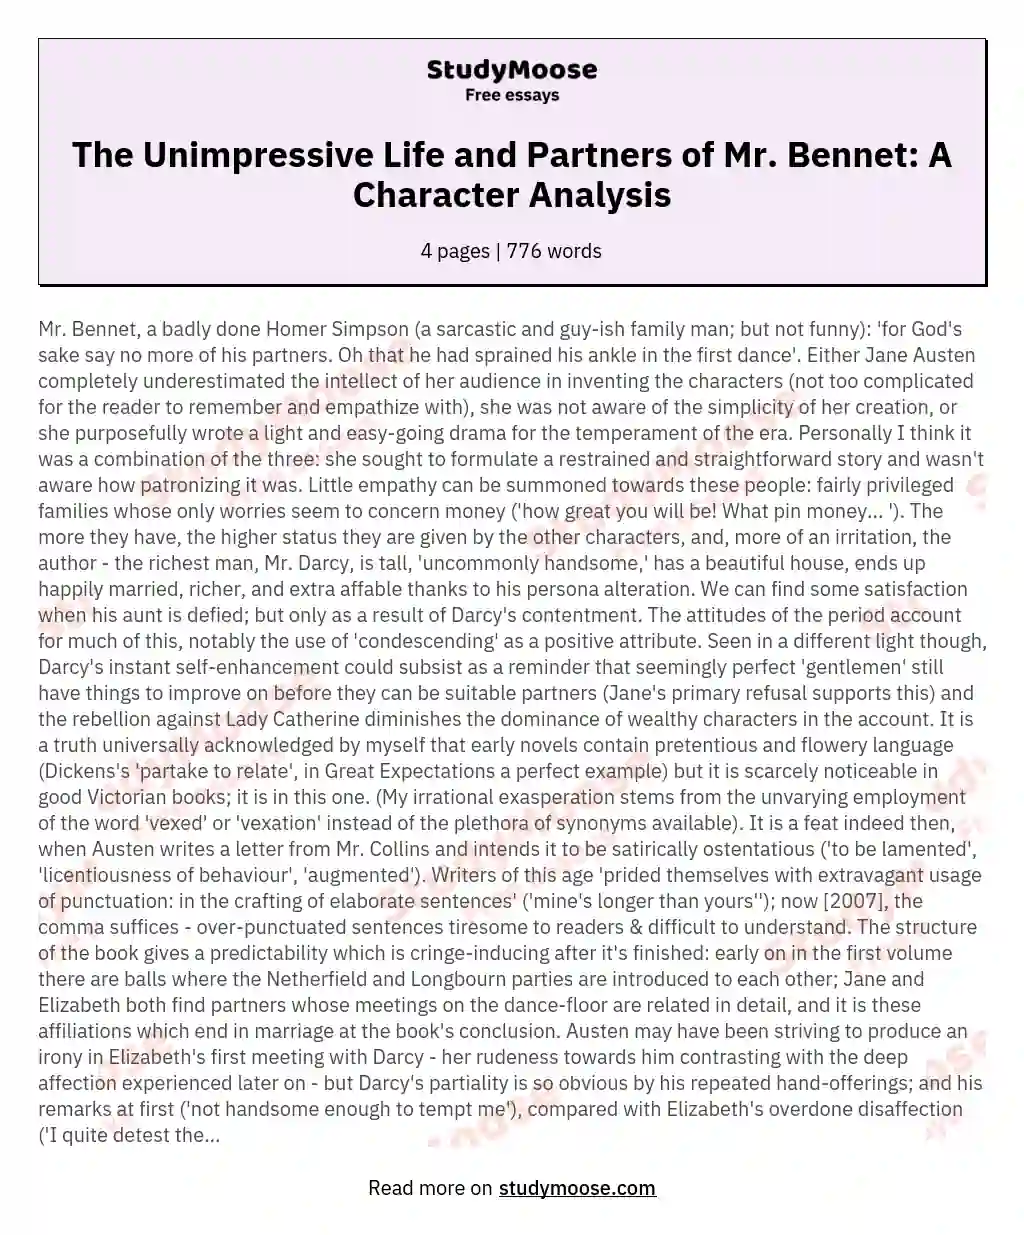 The Unimpressive Life and Partners of Mr. Bennet: A Character Analysis essay